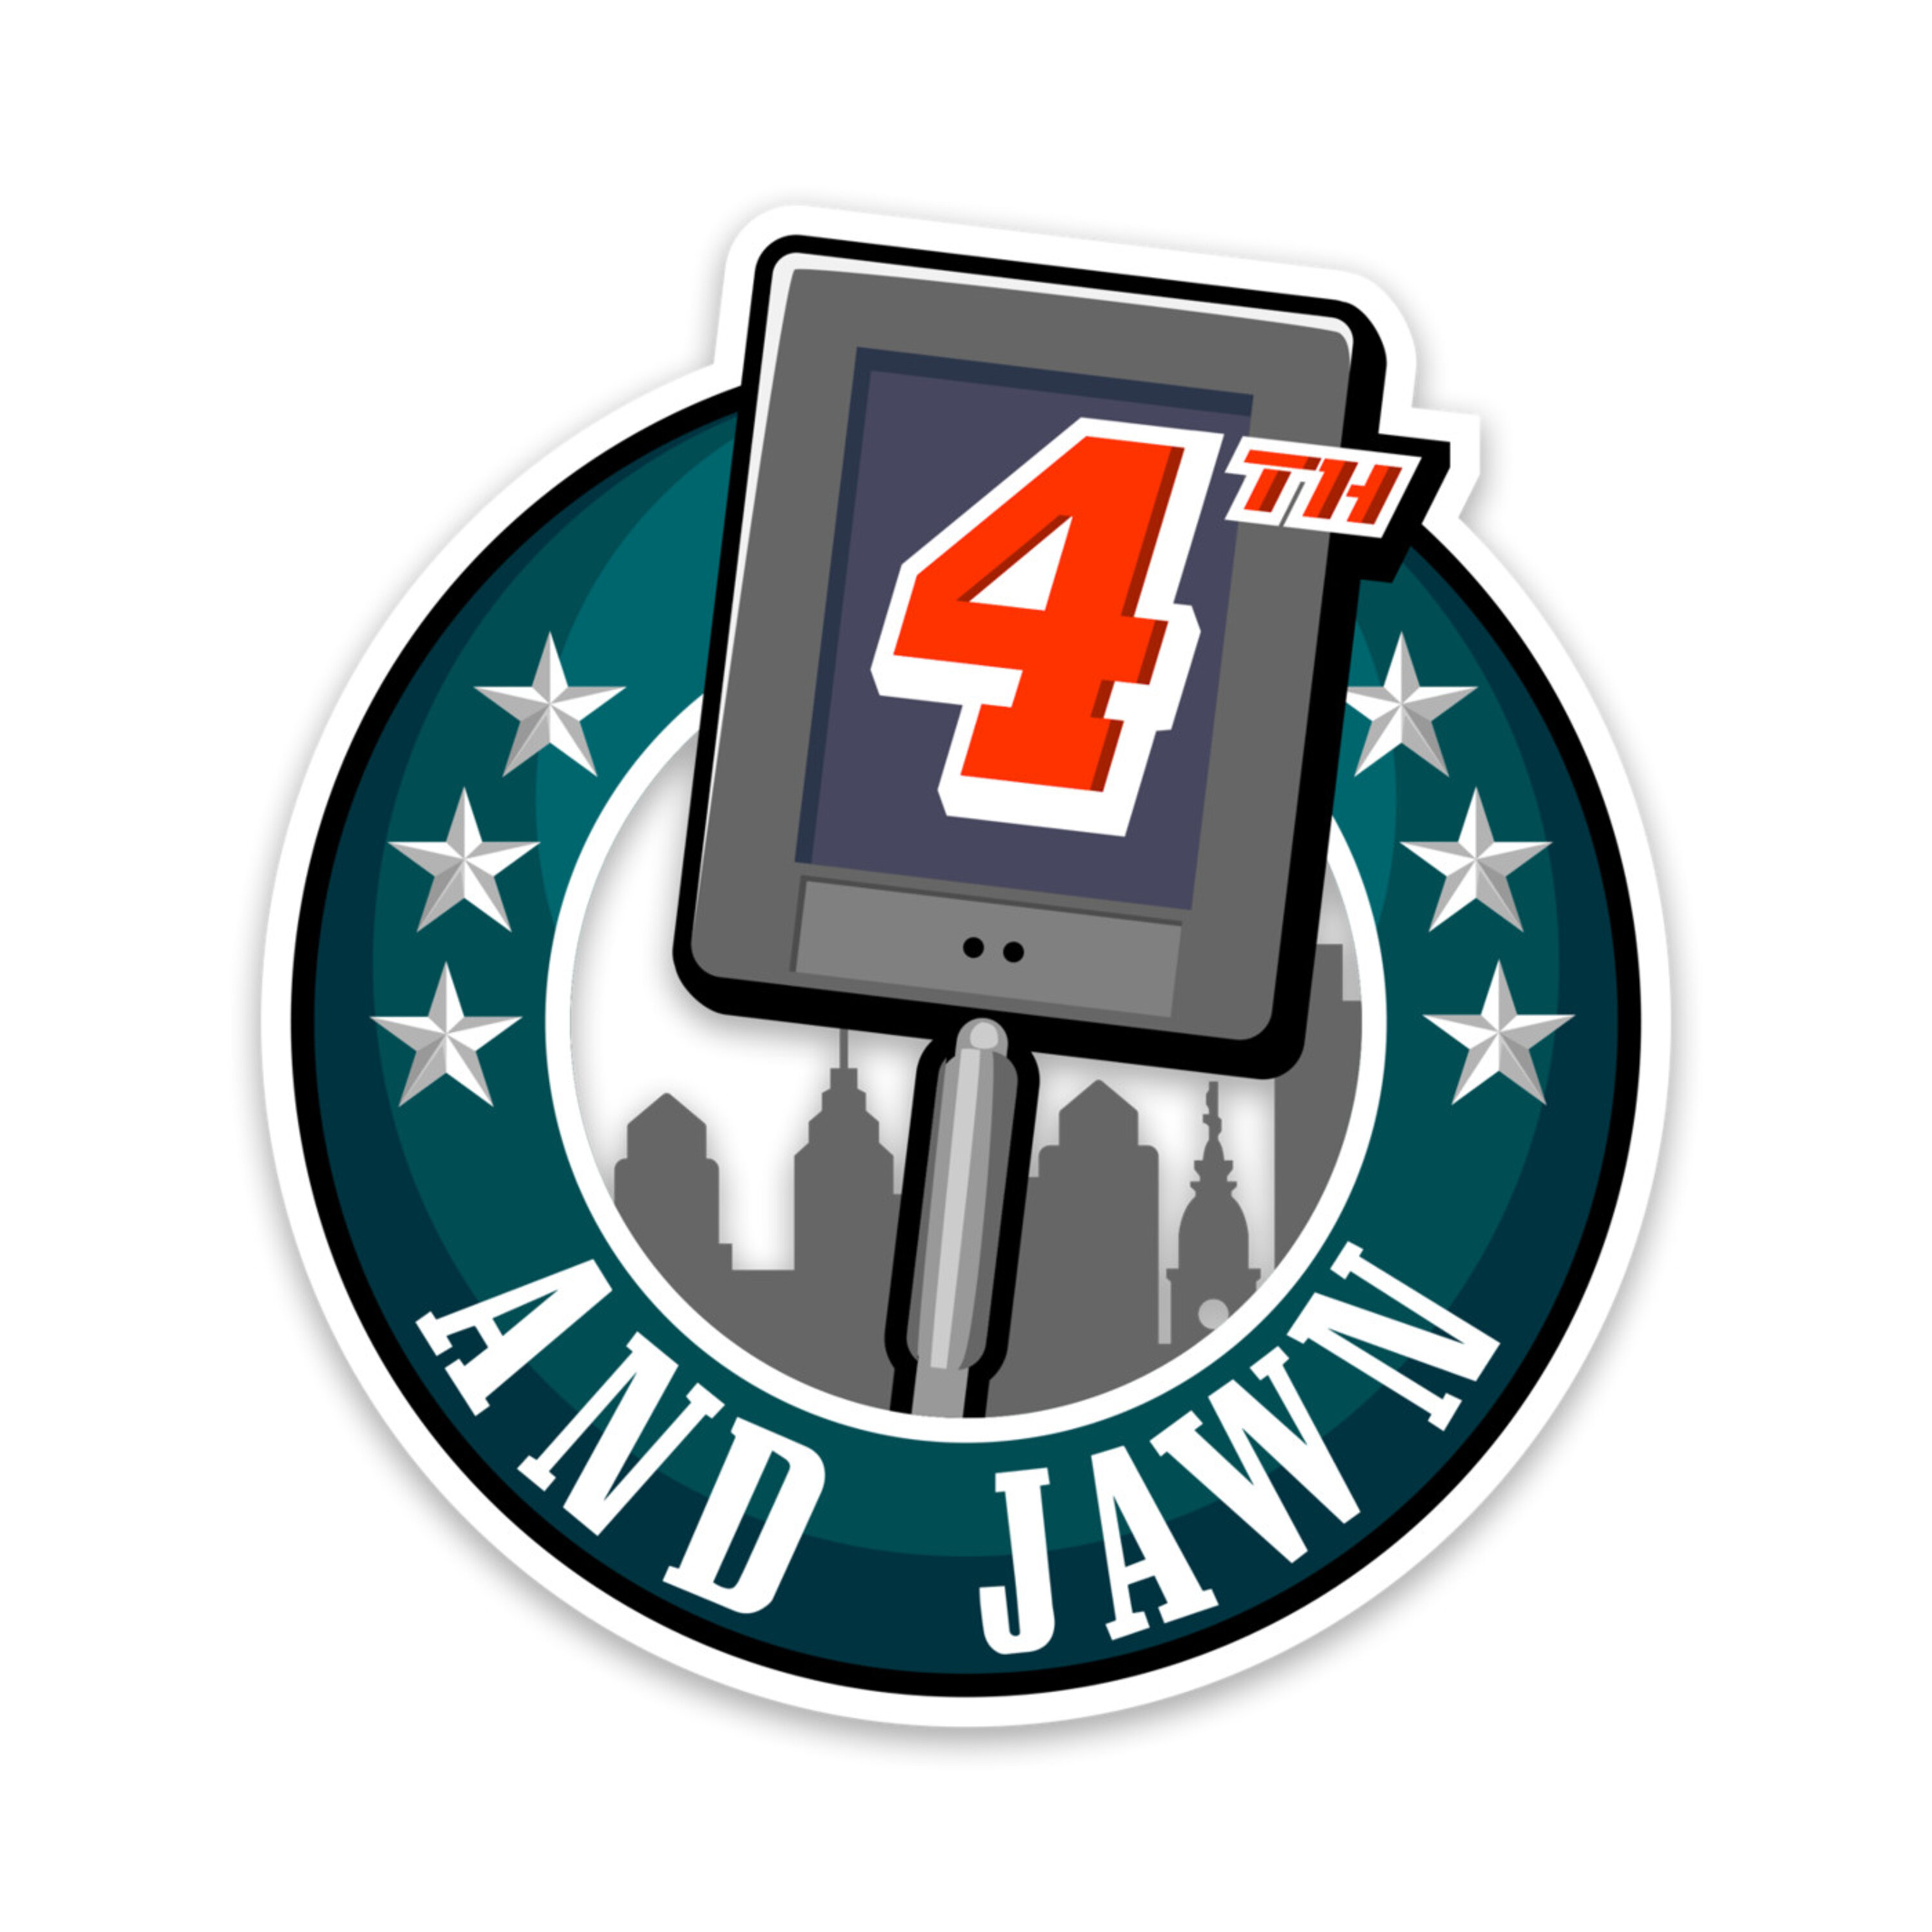 4th and Jawn - Episode 257 - Brandon Brooks Hangs Up The Cleats